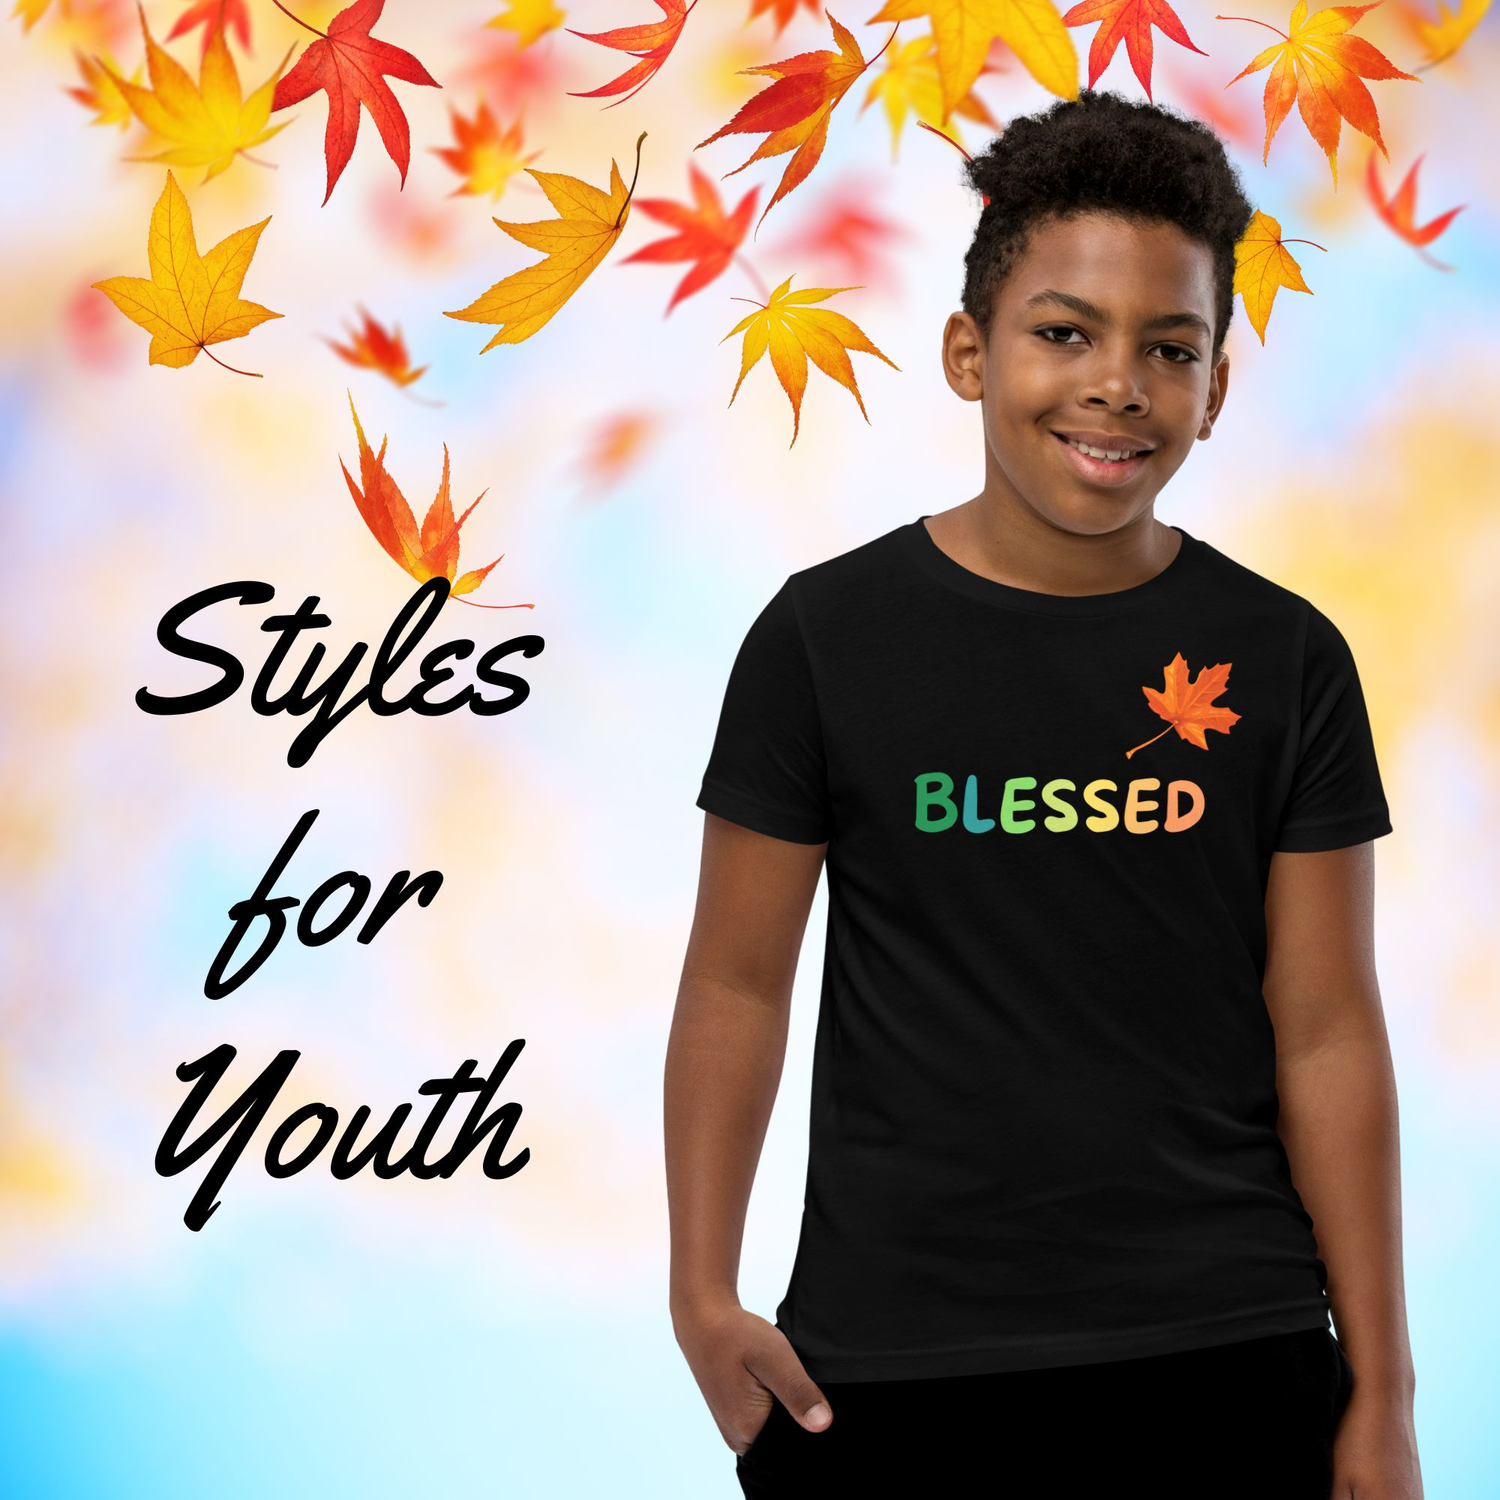 Styles for Youth